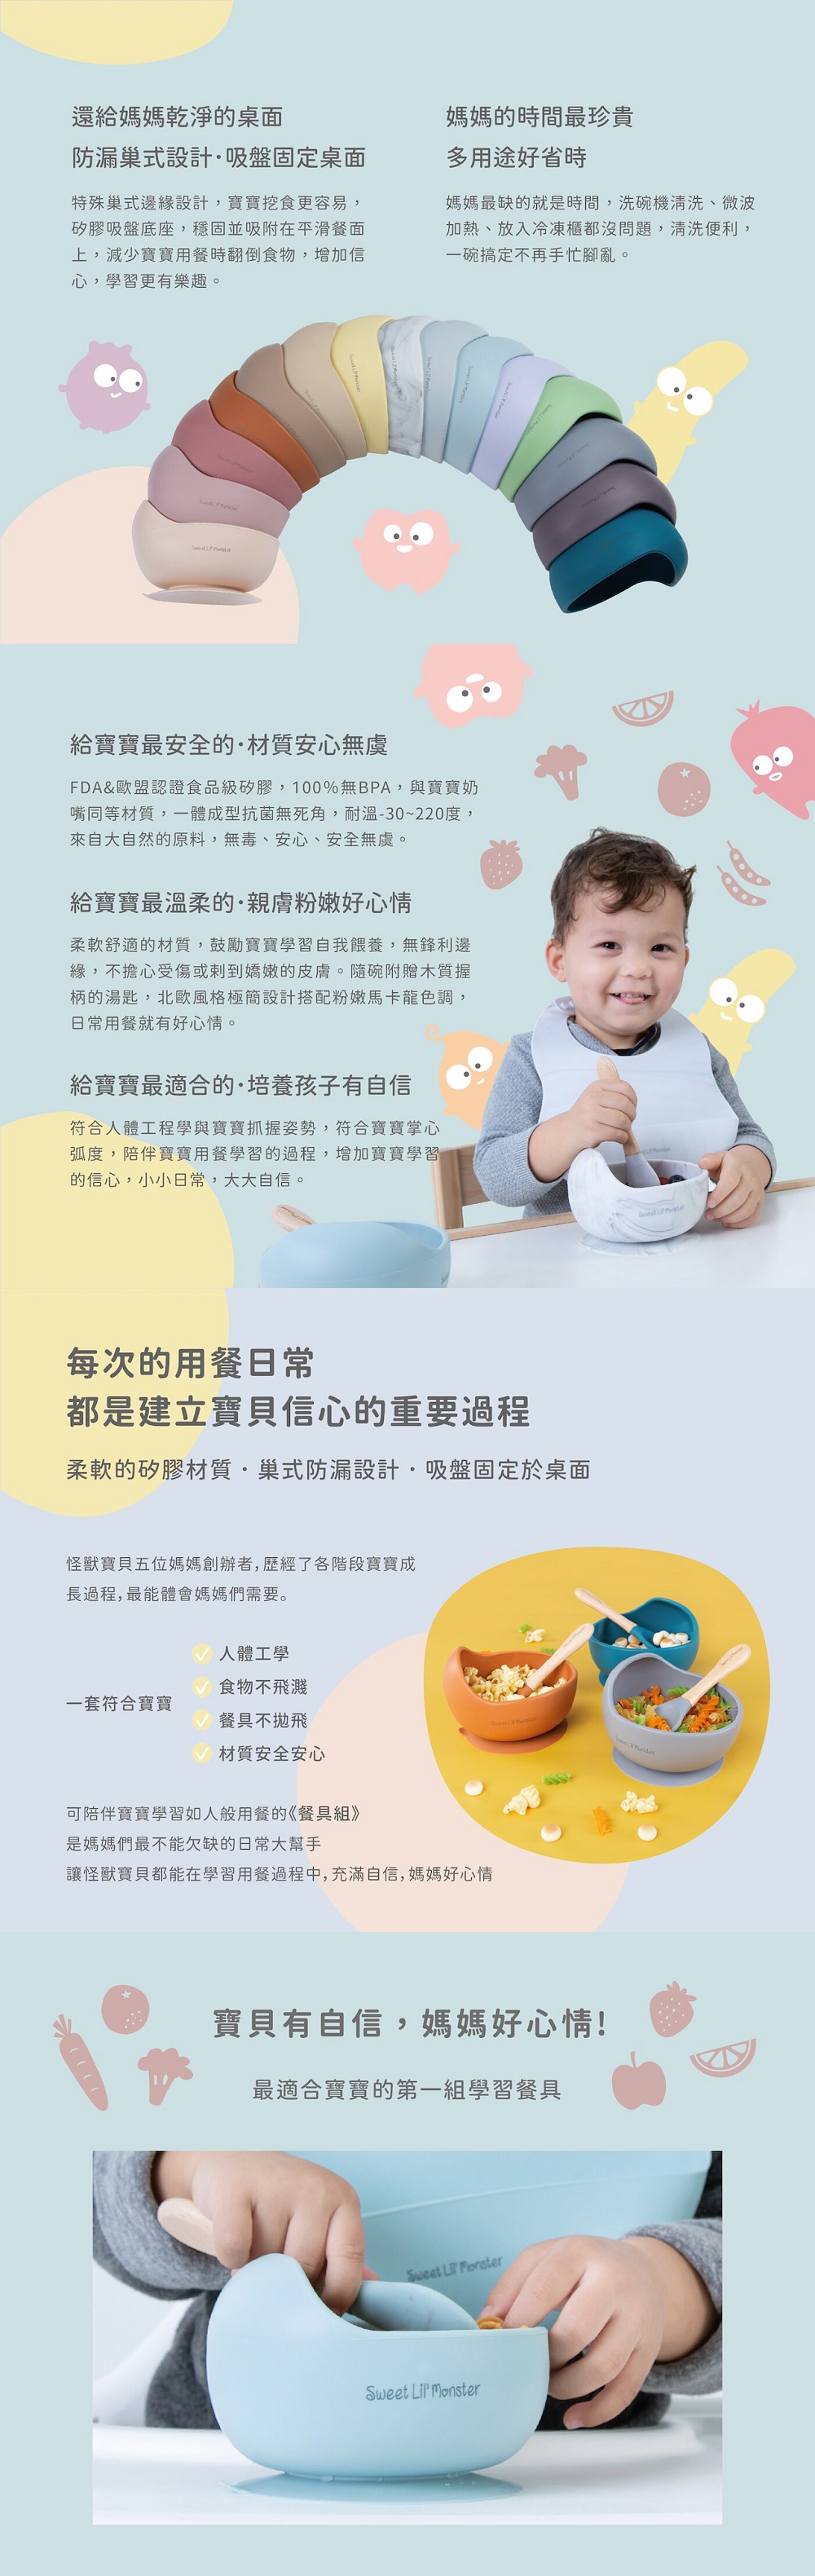 sweet little monster, silicone bowl set, silicone bowl, table wear, silicone spoon, 矽膠餐具, 寶寶餐具, 吸盤餐碗, 怪獸寶貝